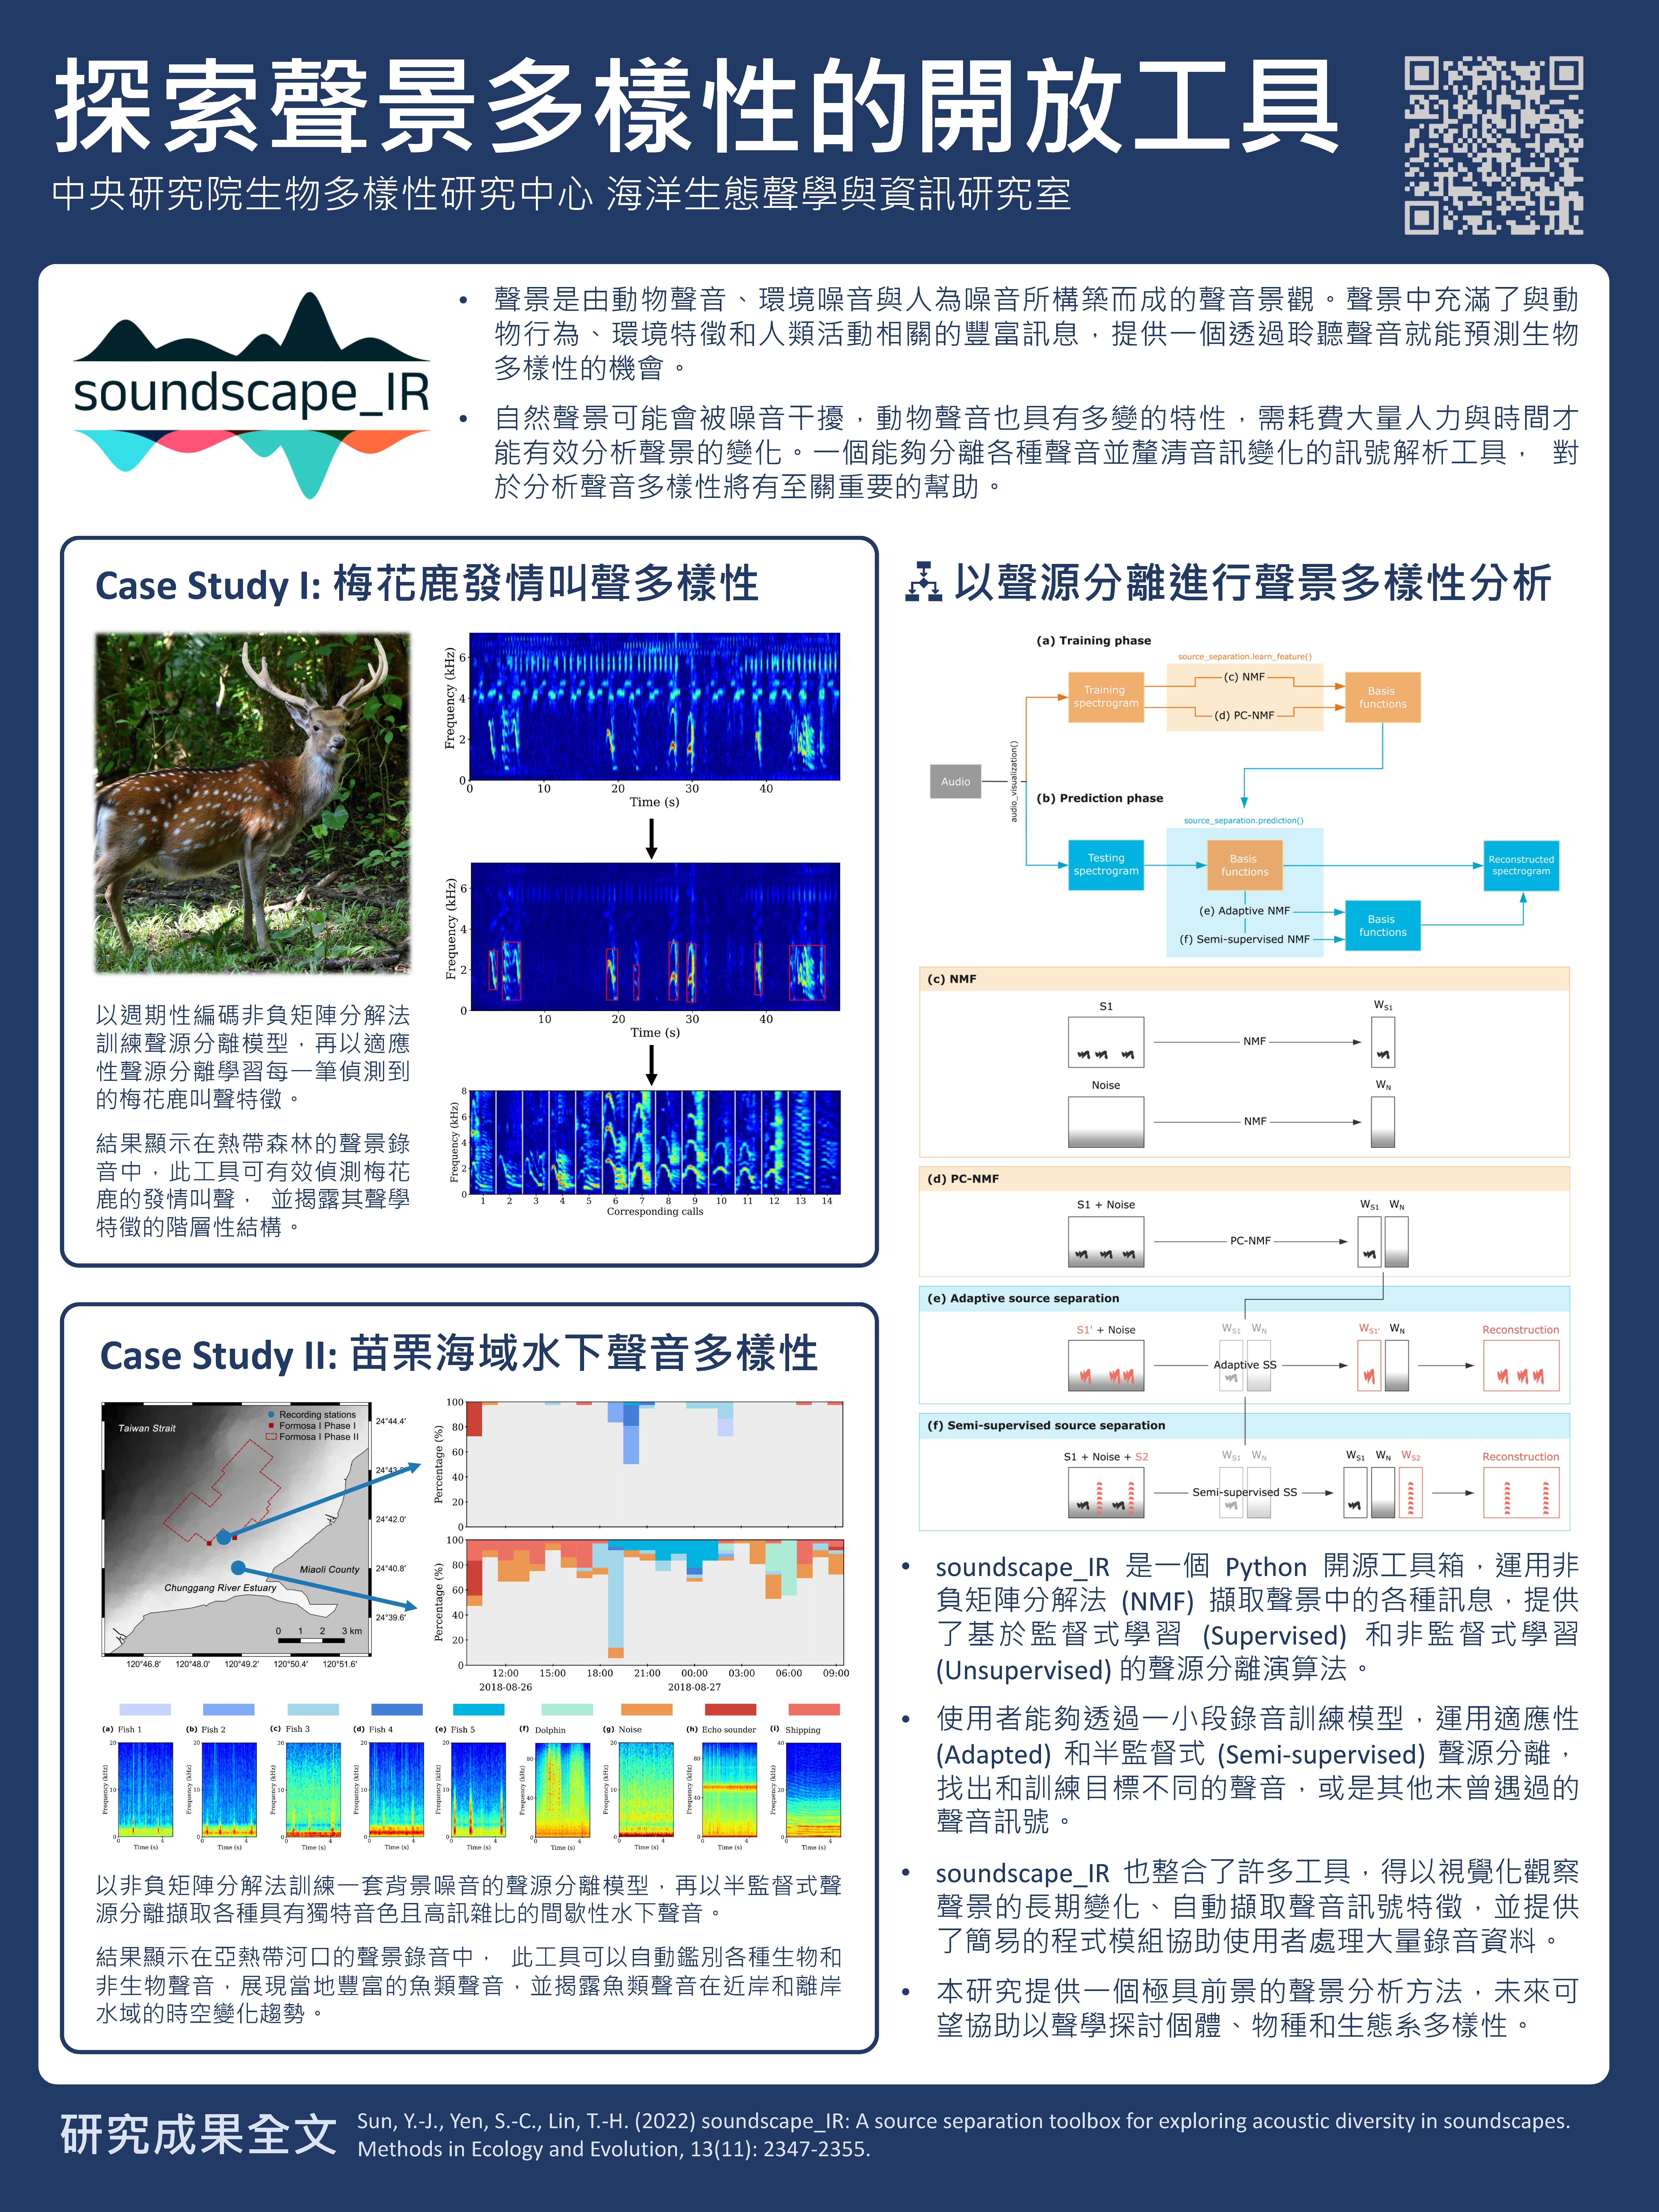 Significant Research Achievements of poster show Dr. Tzu-Hao Lin